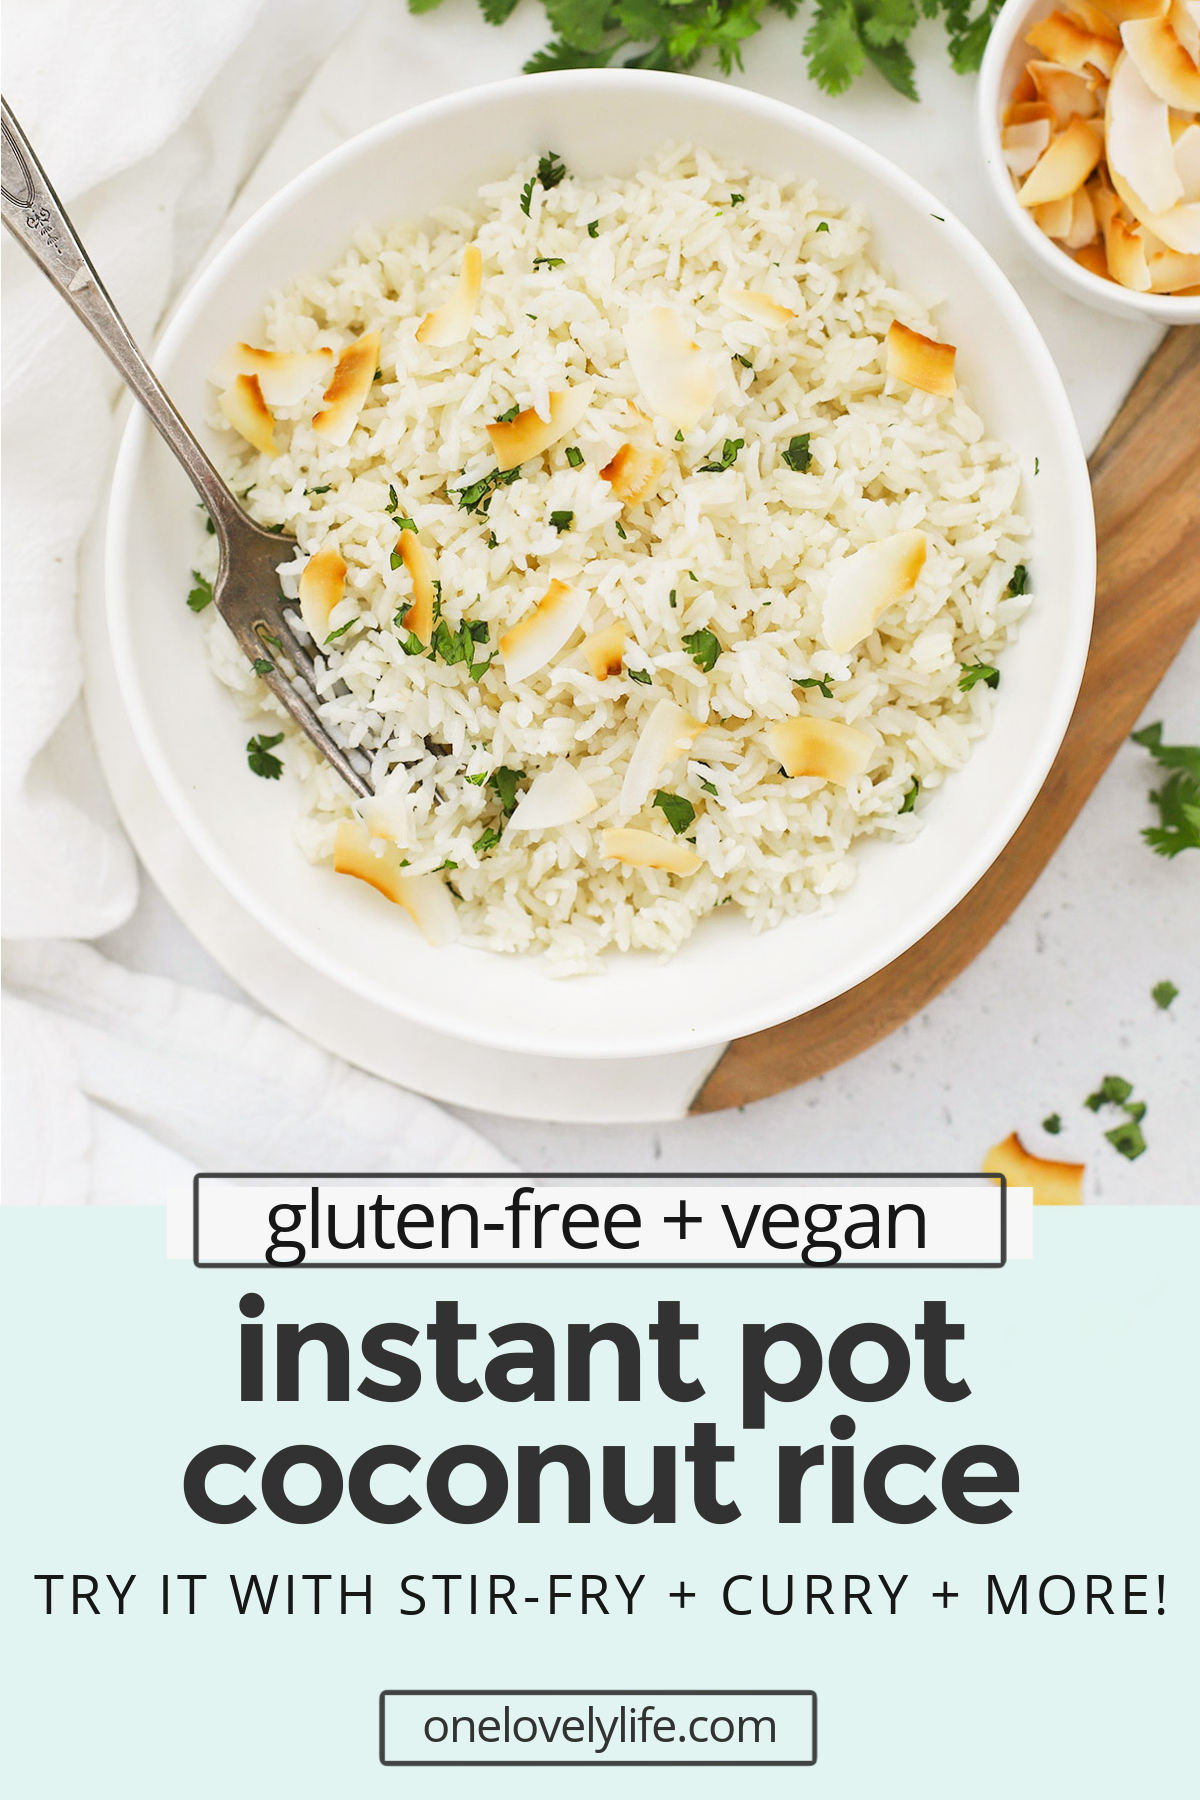 Instant Pot Coconut Rice - This pressure cooker Coconut Rice is SO easy to make and makes a delicious side dish to curries, stir-fries, and all your favorite main dishes. (Vegan, Gluten-Free) // Seasoned Rice // Thai Coconut Rice // Side Dish Recipe // Easy Coconut Rice Recipe #rice #glutenfree #instantpot #pressurecooker #curry